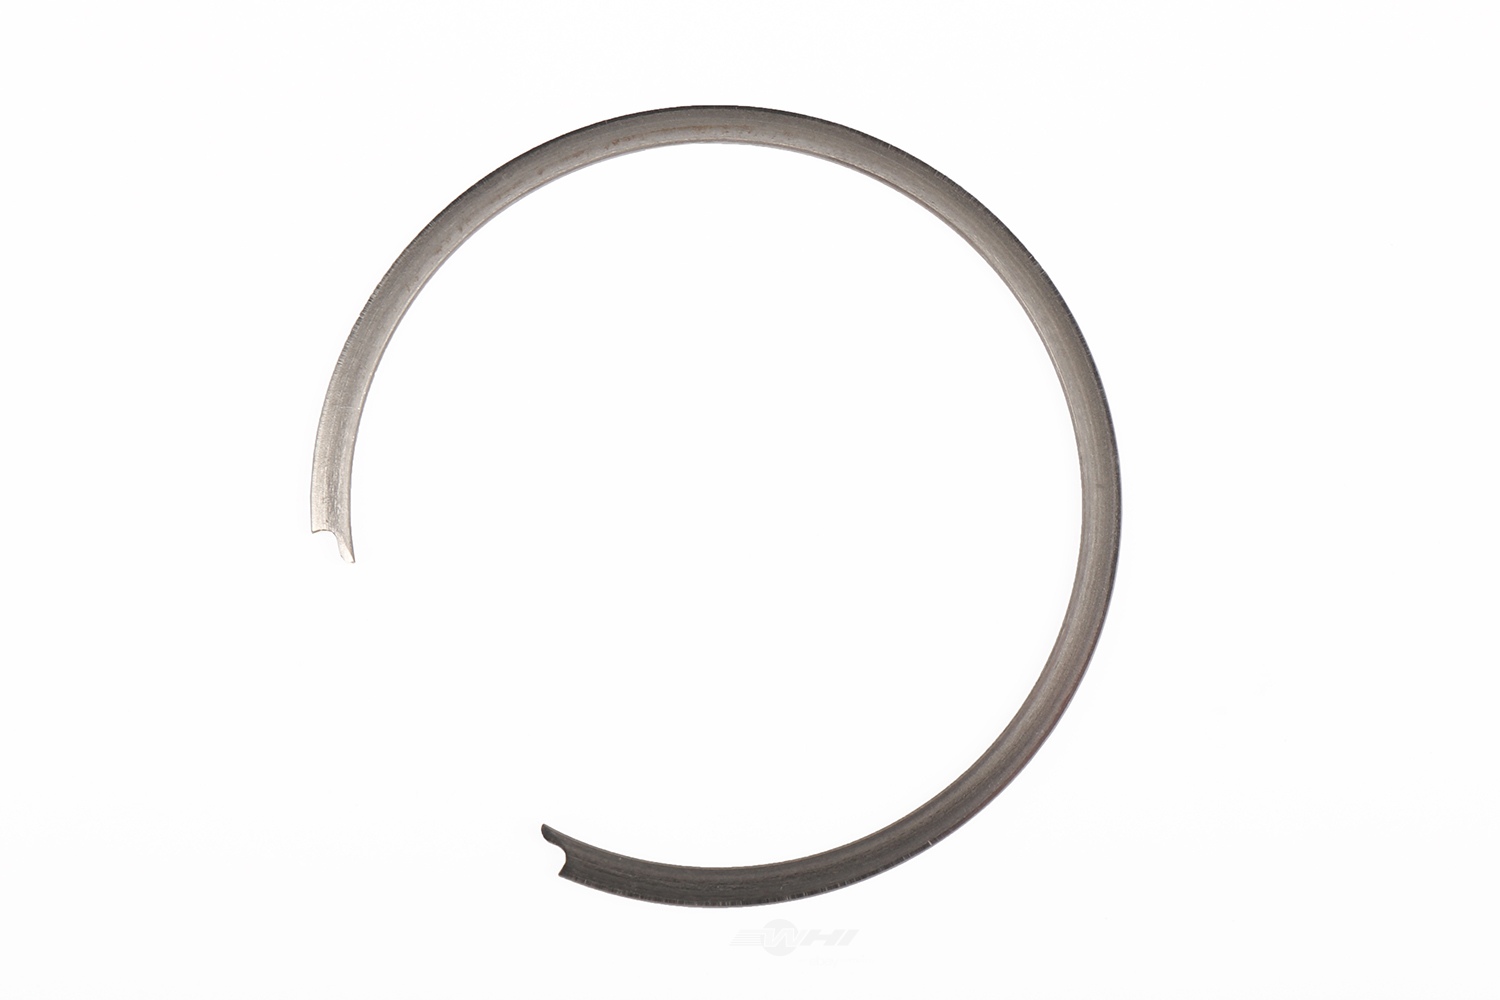 GM GENUINE PARTS - Automatic Transmission Torque Converter Seal Retaining Ring - GMP 24218963